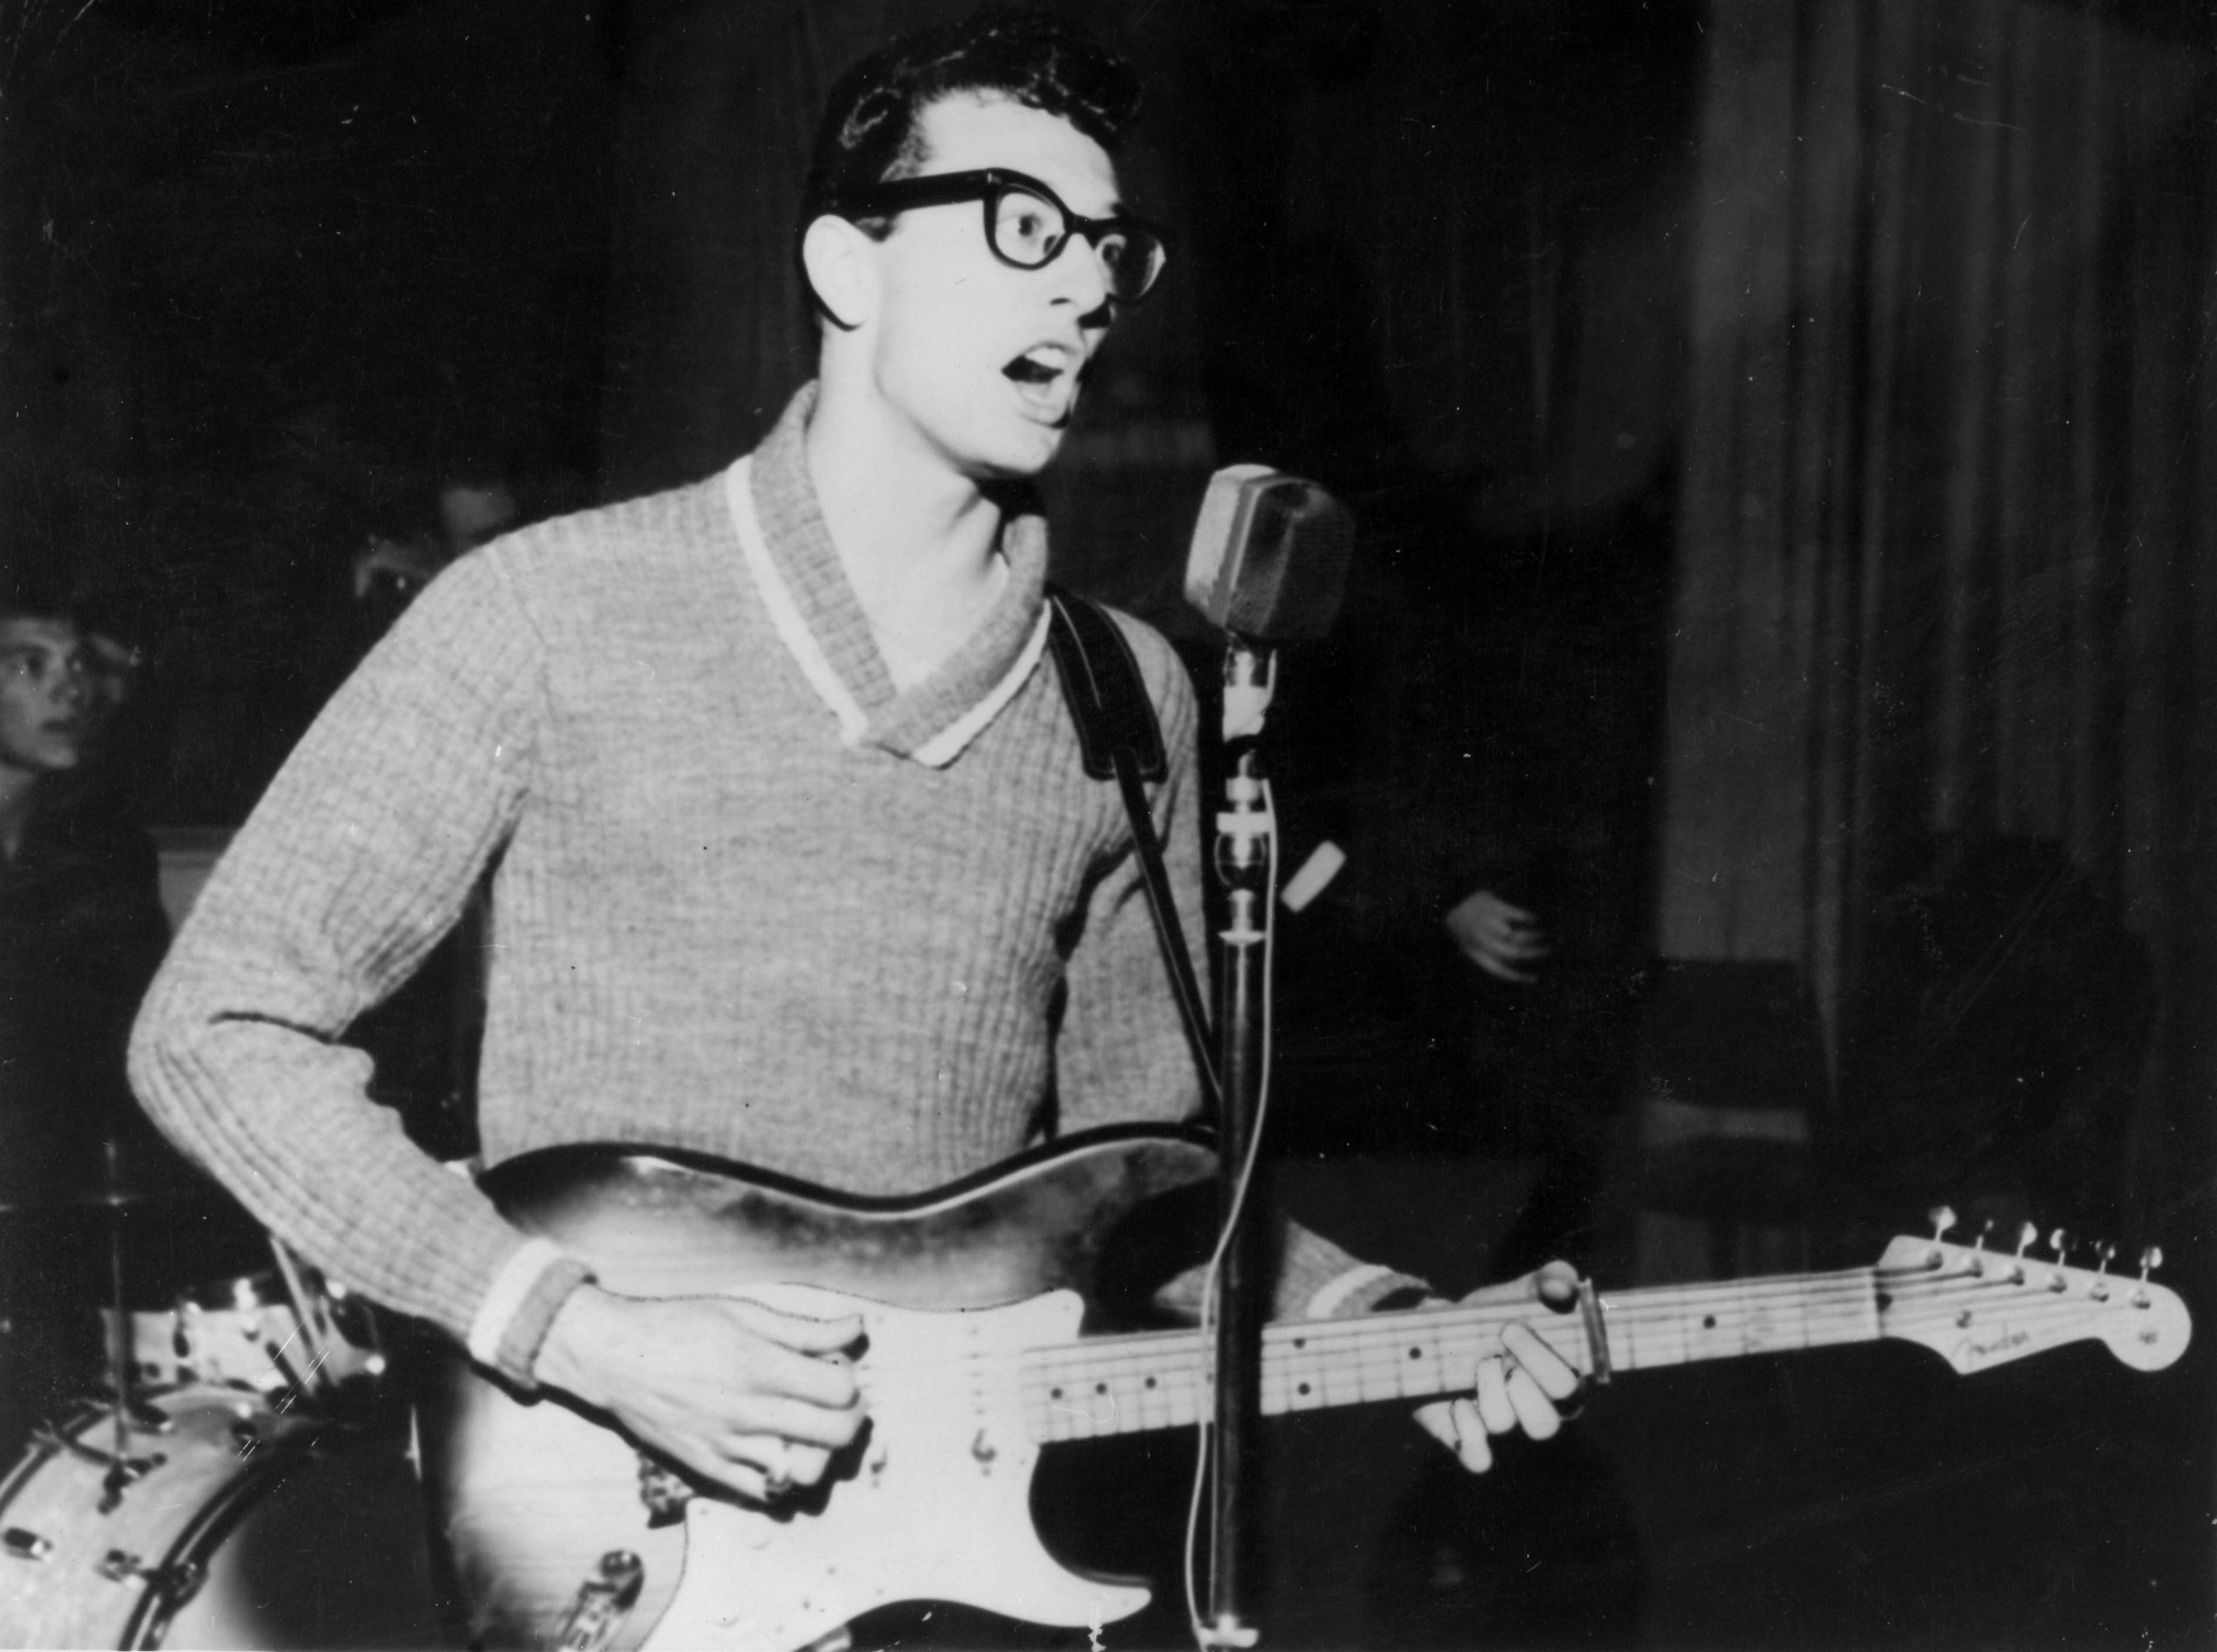 September 7: The late Buddy Holly was born in 1936